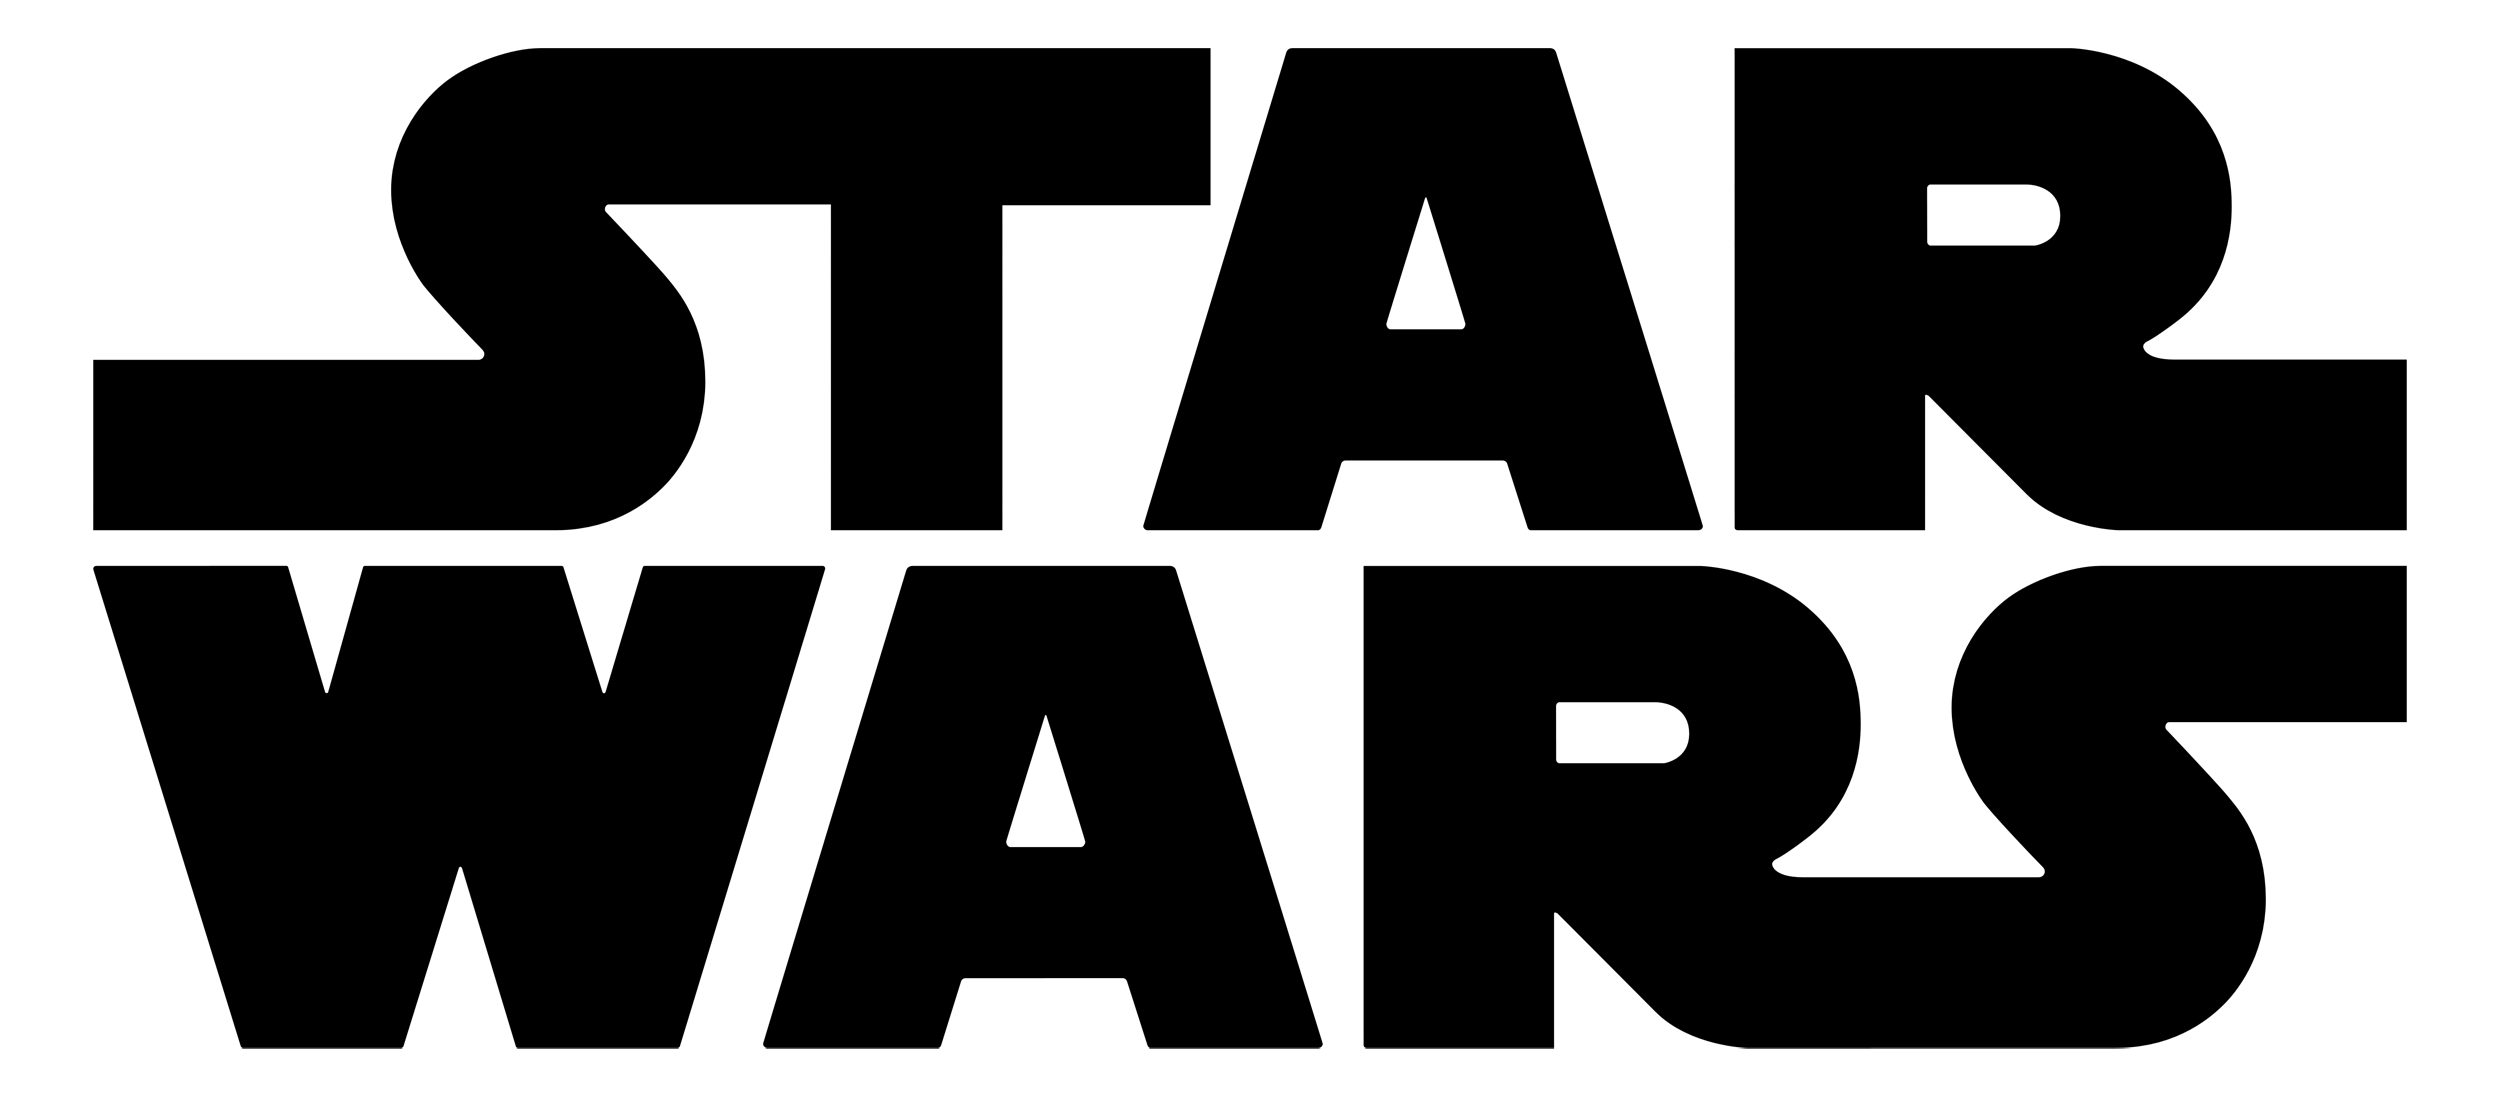 Star Wars Logo - Star Wars Logo, Star Wars Symbol, Meaning, History and Evolution